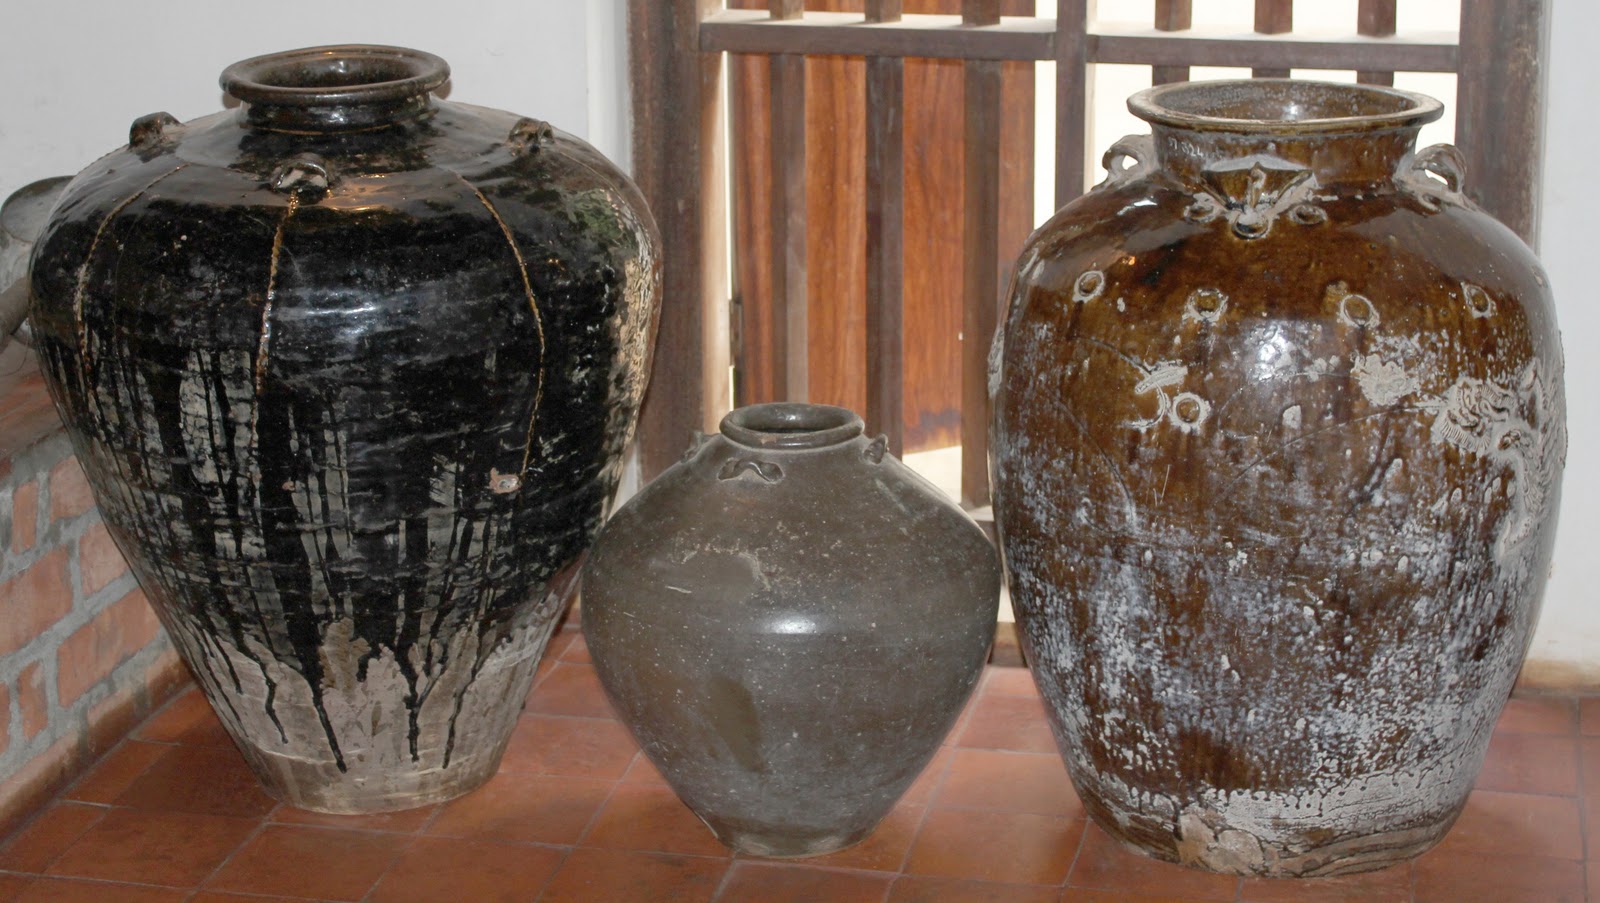 ‘Cheena Bharani’ – the Chinese jars in Kerala brought by Chinese traders